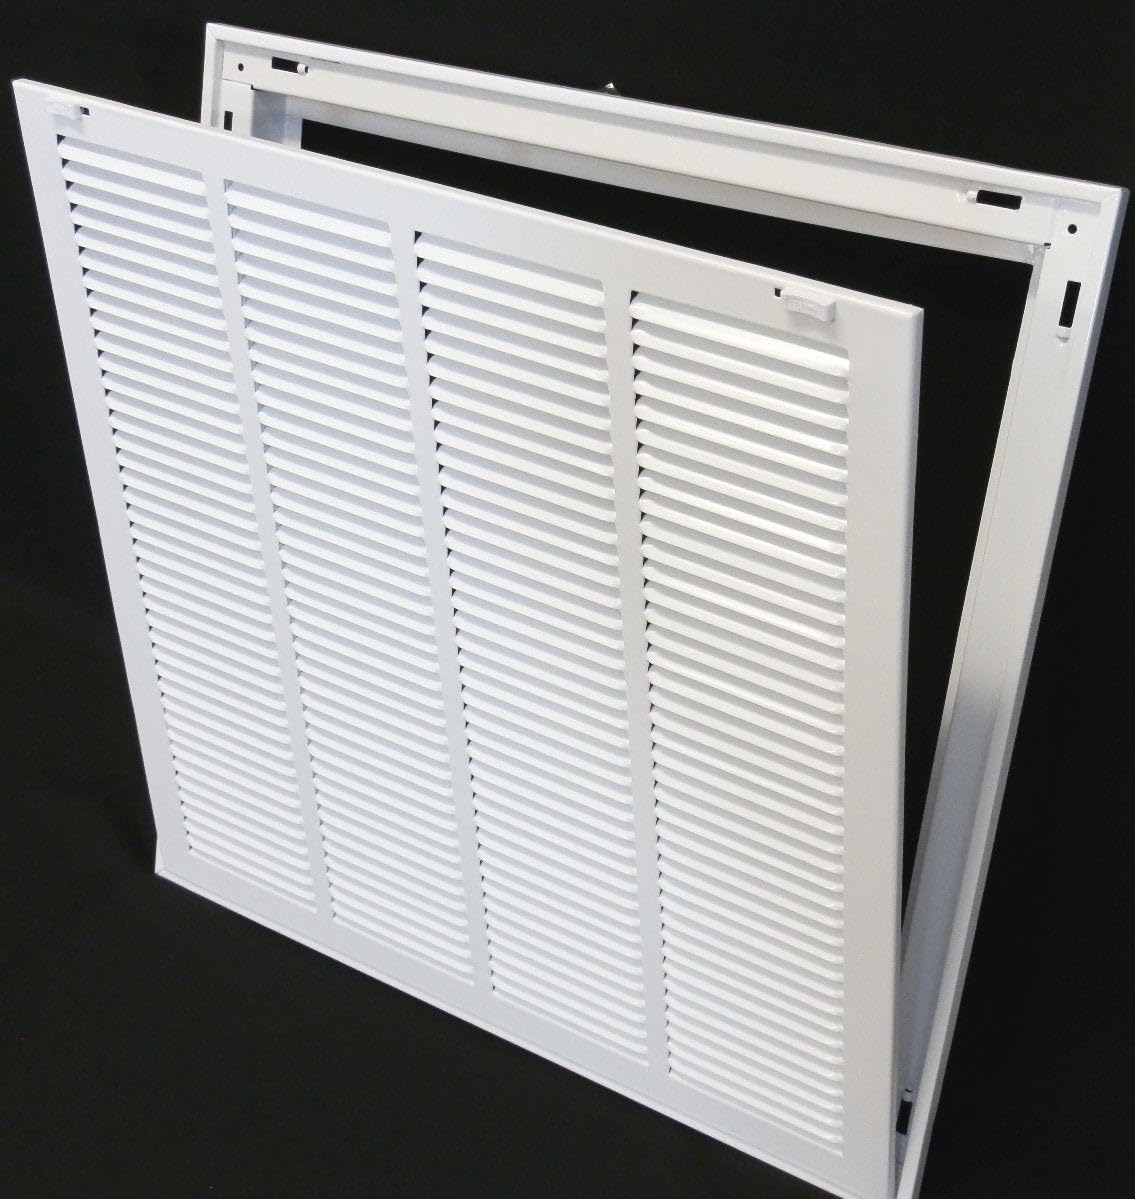 30&quot; X 16&quot; Steel Return Air Filter Grille for 1&quot; Filter - Removable Frame - [Outer Dimensions: 32 5/8&quot; X 20 5/8&quot;]